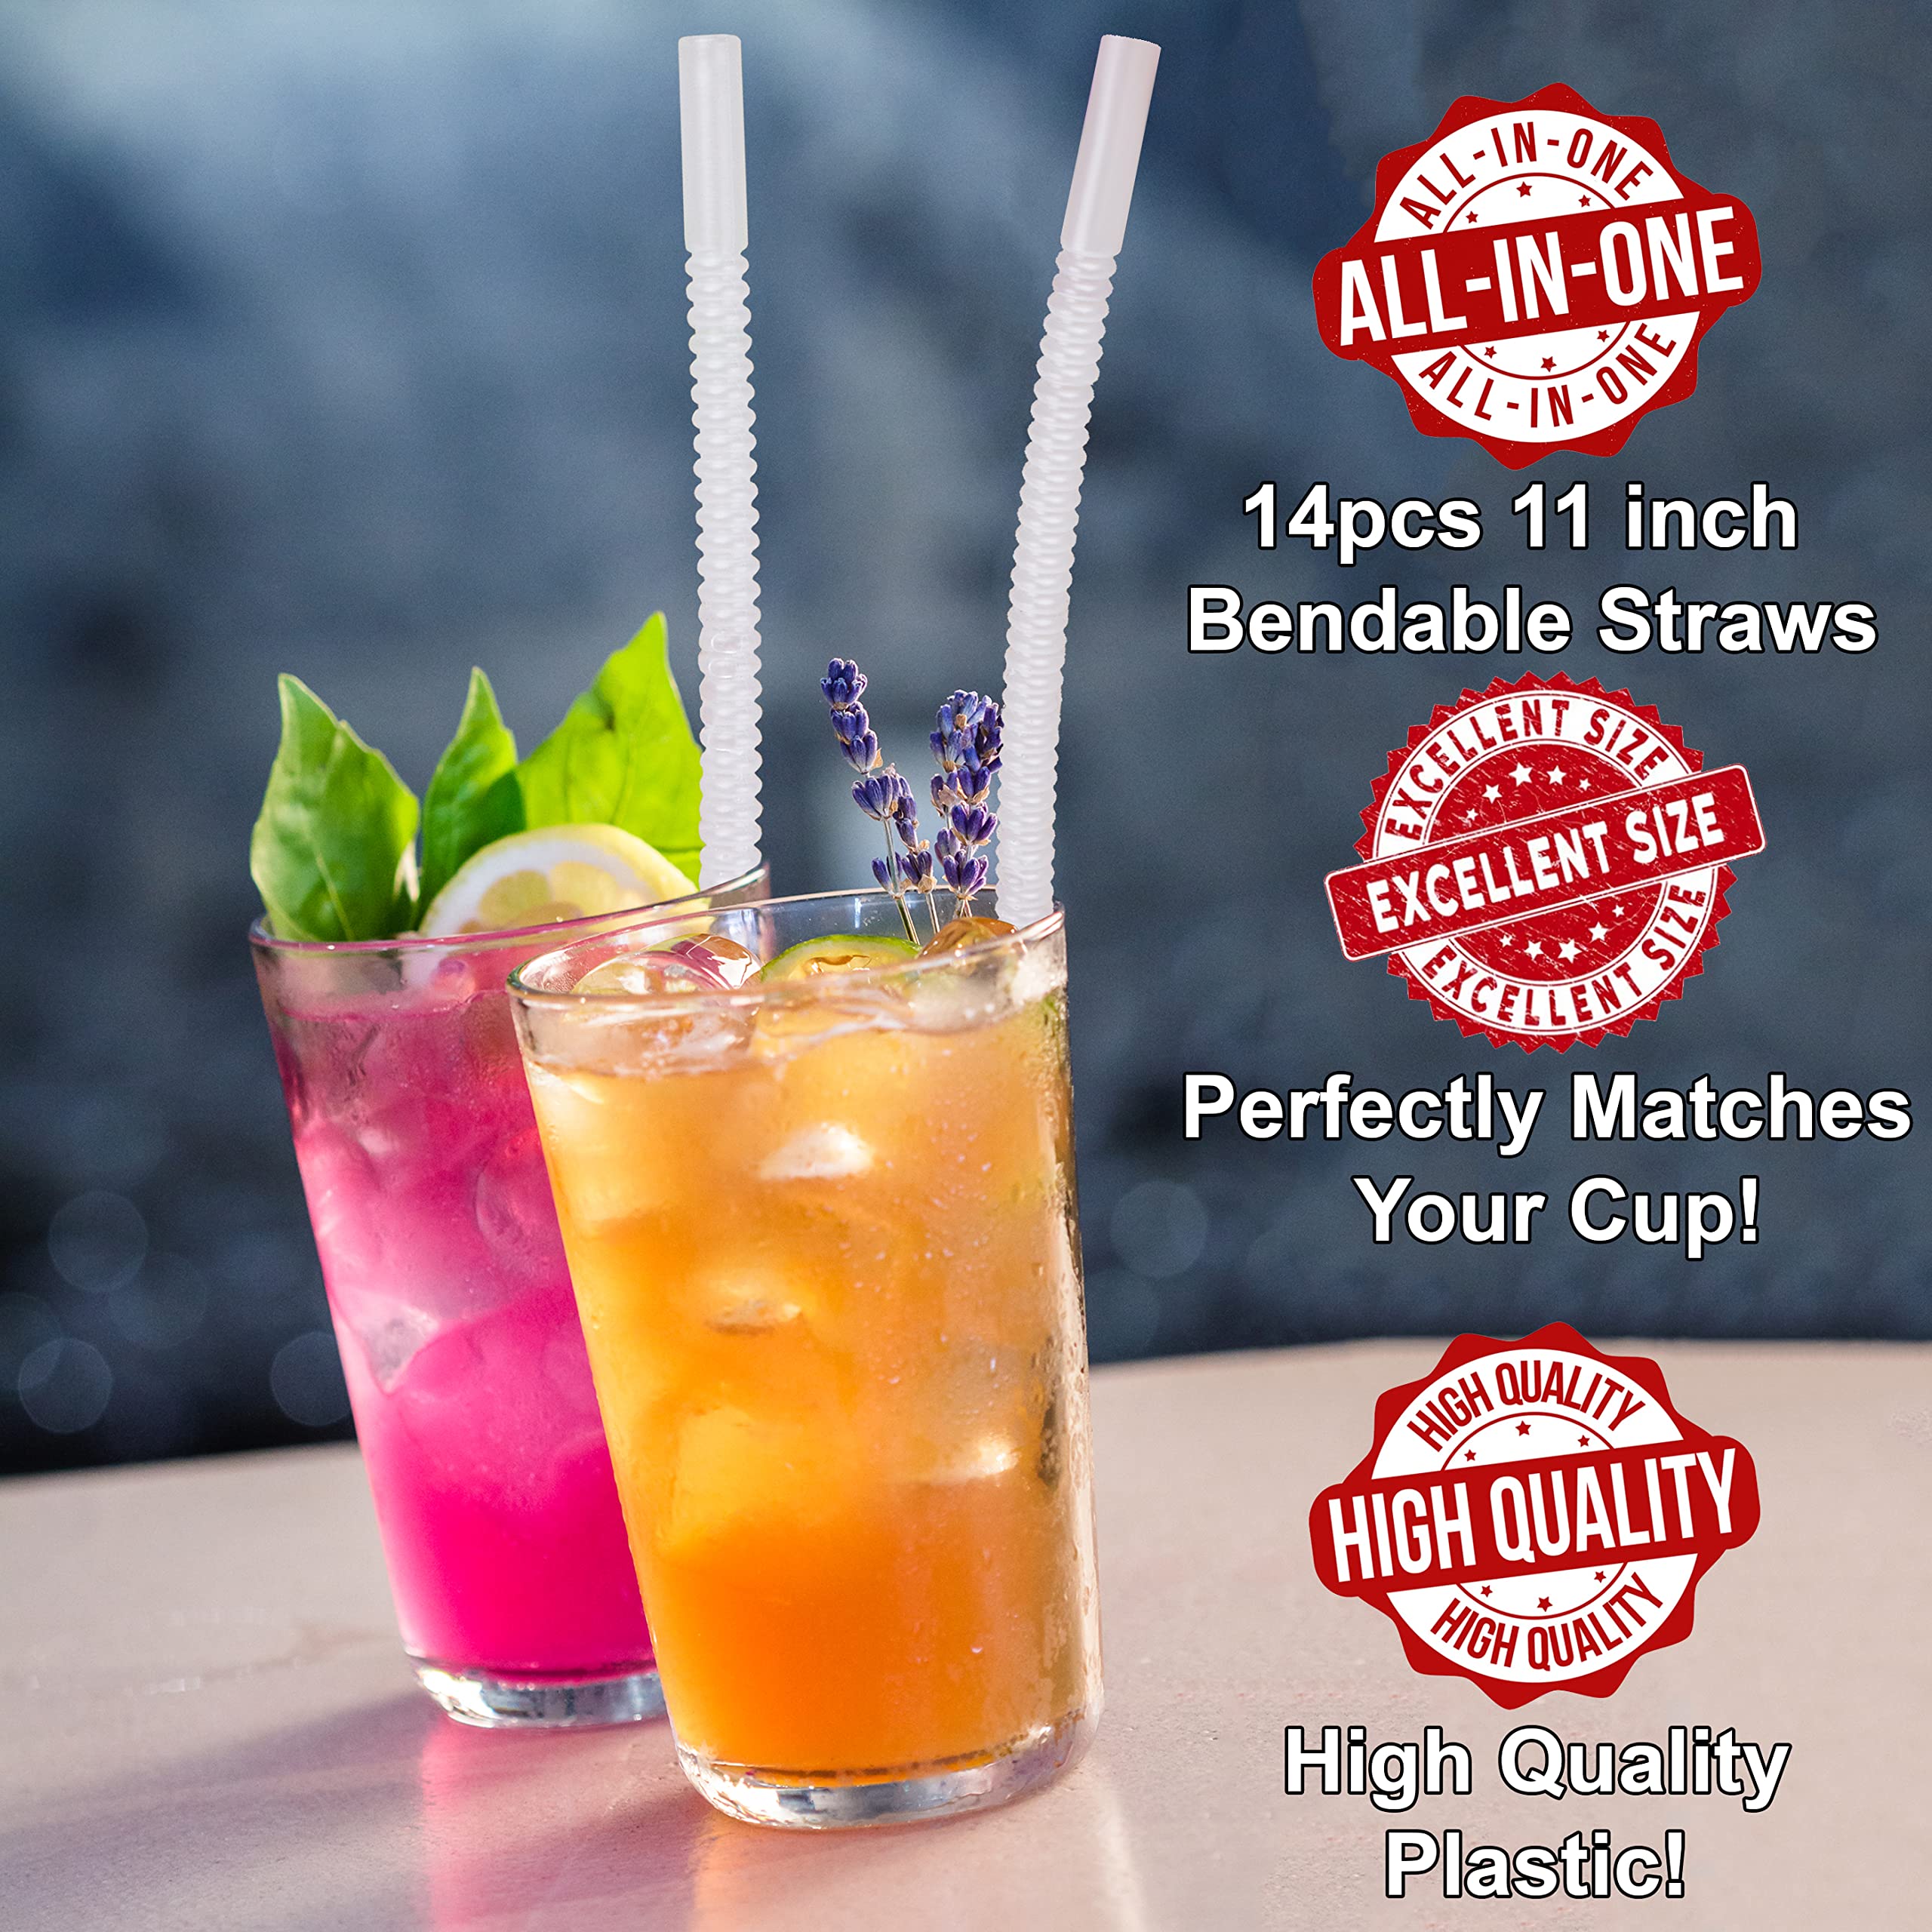 Bendable Straws - 11 inch Long Flexible Straws - Bendy Drinking Straws Reusable - 14 Pack